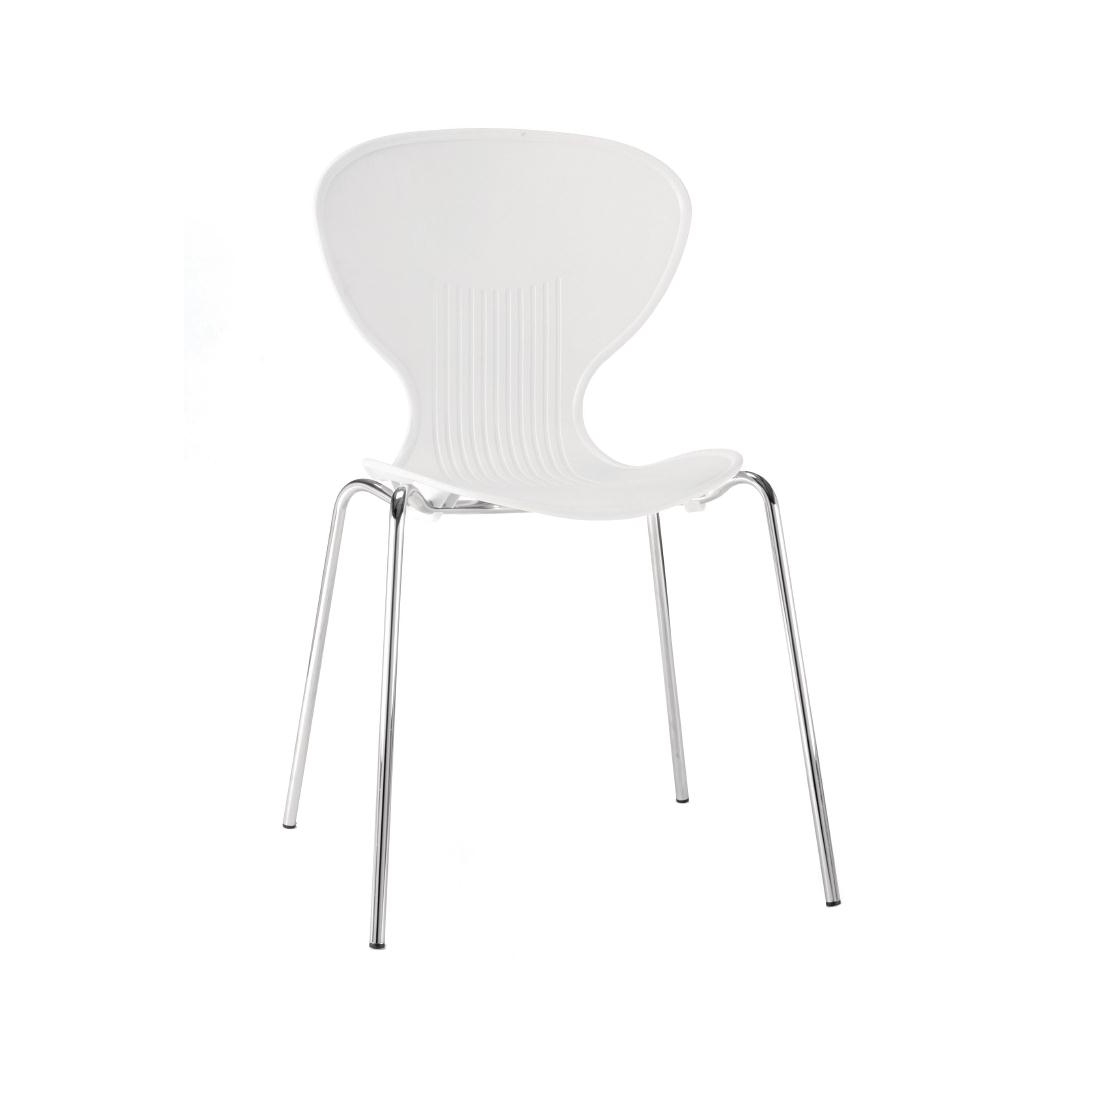 Bolero White Stacking Plastic Side Chairs (Pack of 4)